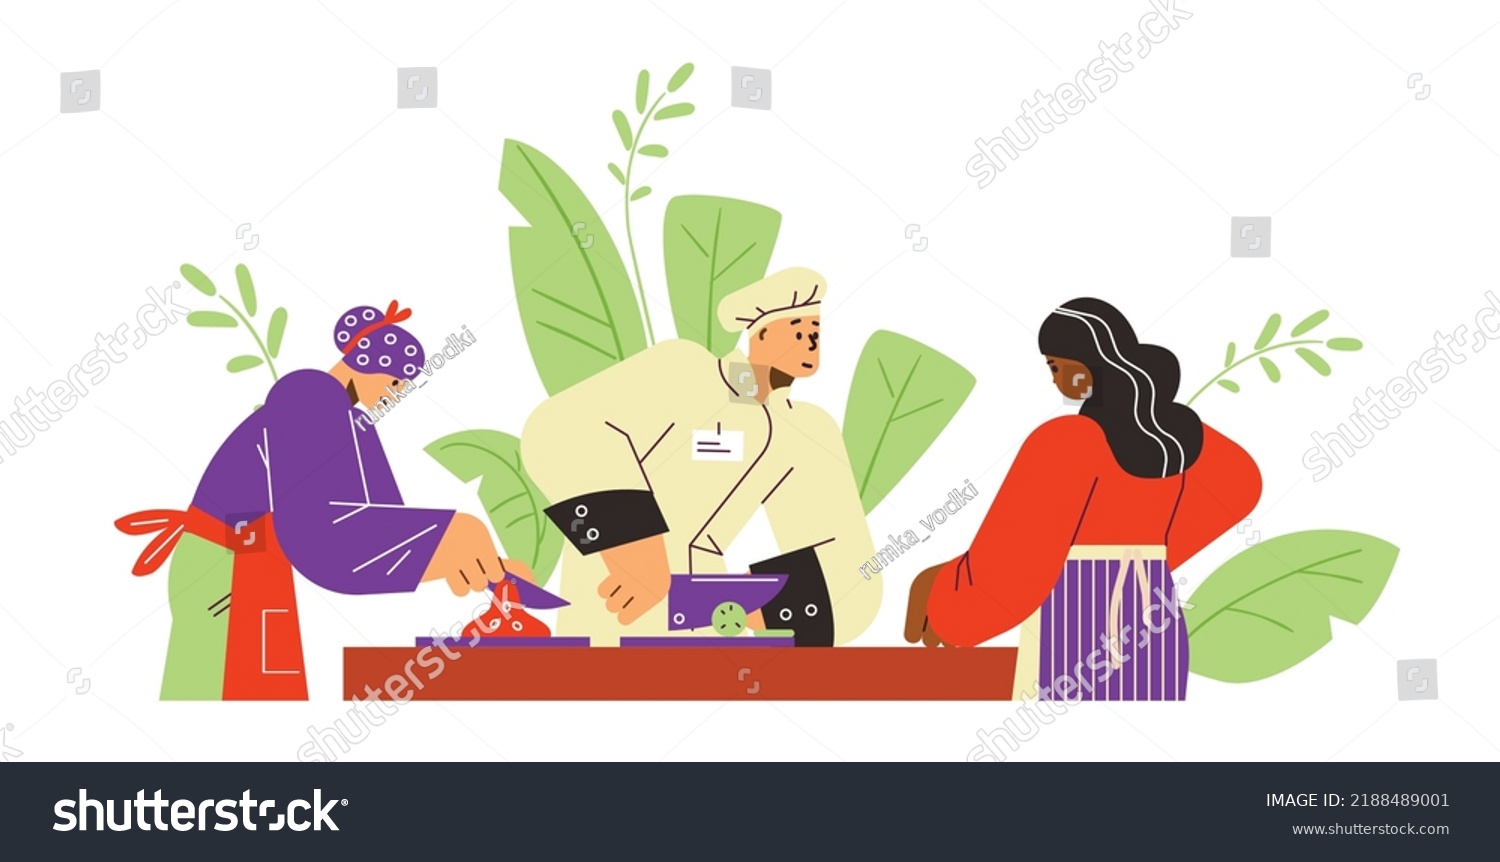 Women cooking with chef at culinary school flat style, vector illustration isolated on white background. Characters in uniform making tasty food, learning #2188489001